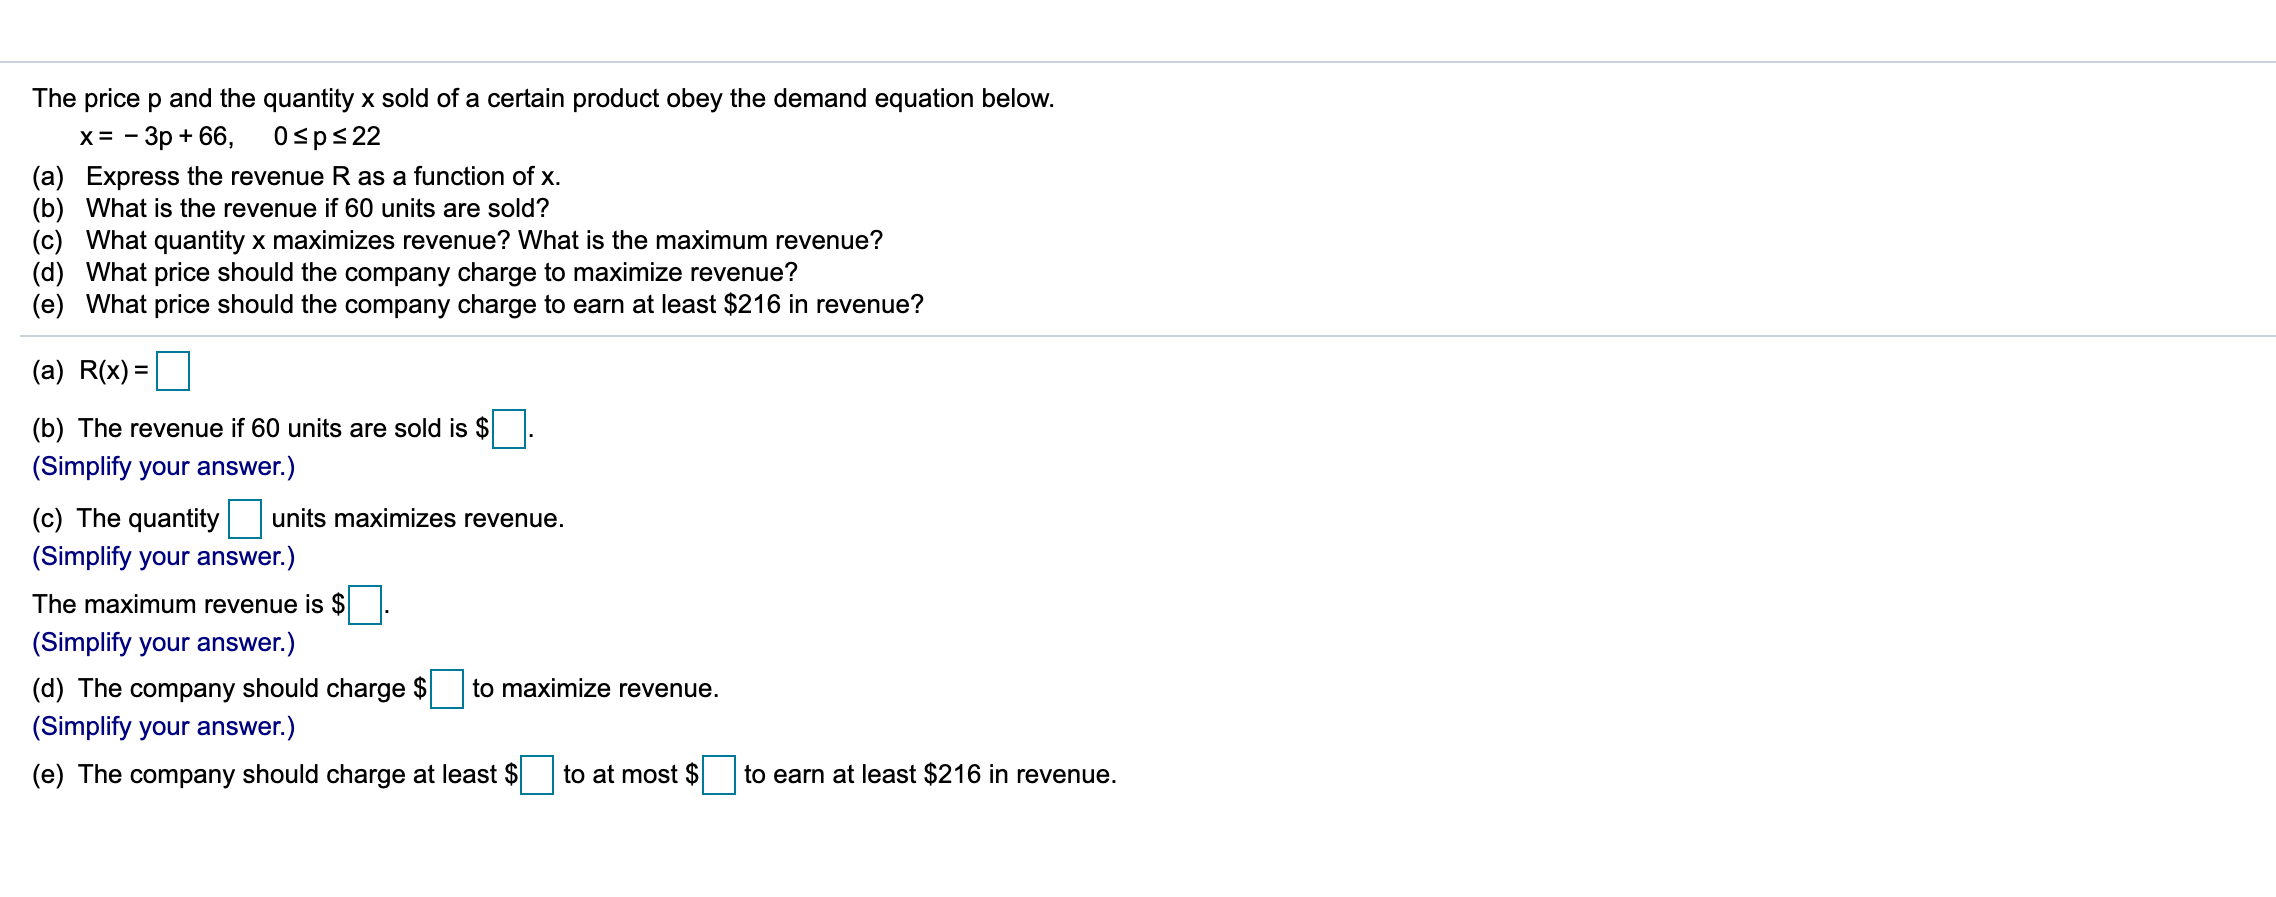 The price p and the quantity x sold of a certain product obey the demand equation below.
х%3D — Зр + 66, 0sp$22
(a) Express the revenue R as a function of x.
(b) What is the revenue if 60 units are sold?
(c) What quantity x maximizes revenue? What is the maximum revenue?
(d) What price should the company charge to maximize revenue?
(e) What price should the company charge to earn at least $216 in revenue?
(a) R(x) =
%3D
(b) The revenue if 60 units are sold is
(Simplify your answer.)
(c) The quantity
units maximizes revenue.
(Simplify your answer.)
The maximum revenue is $
(Simplify your answer.)
(d) The company should charge $
(Simplify your answer.)
to maximize revenue.
(e) The company should charge at least $
to at most $
to earn at least $216 in revenue.
